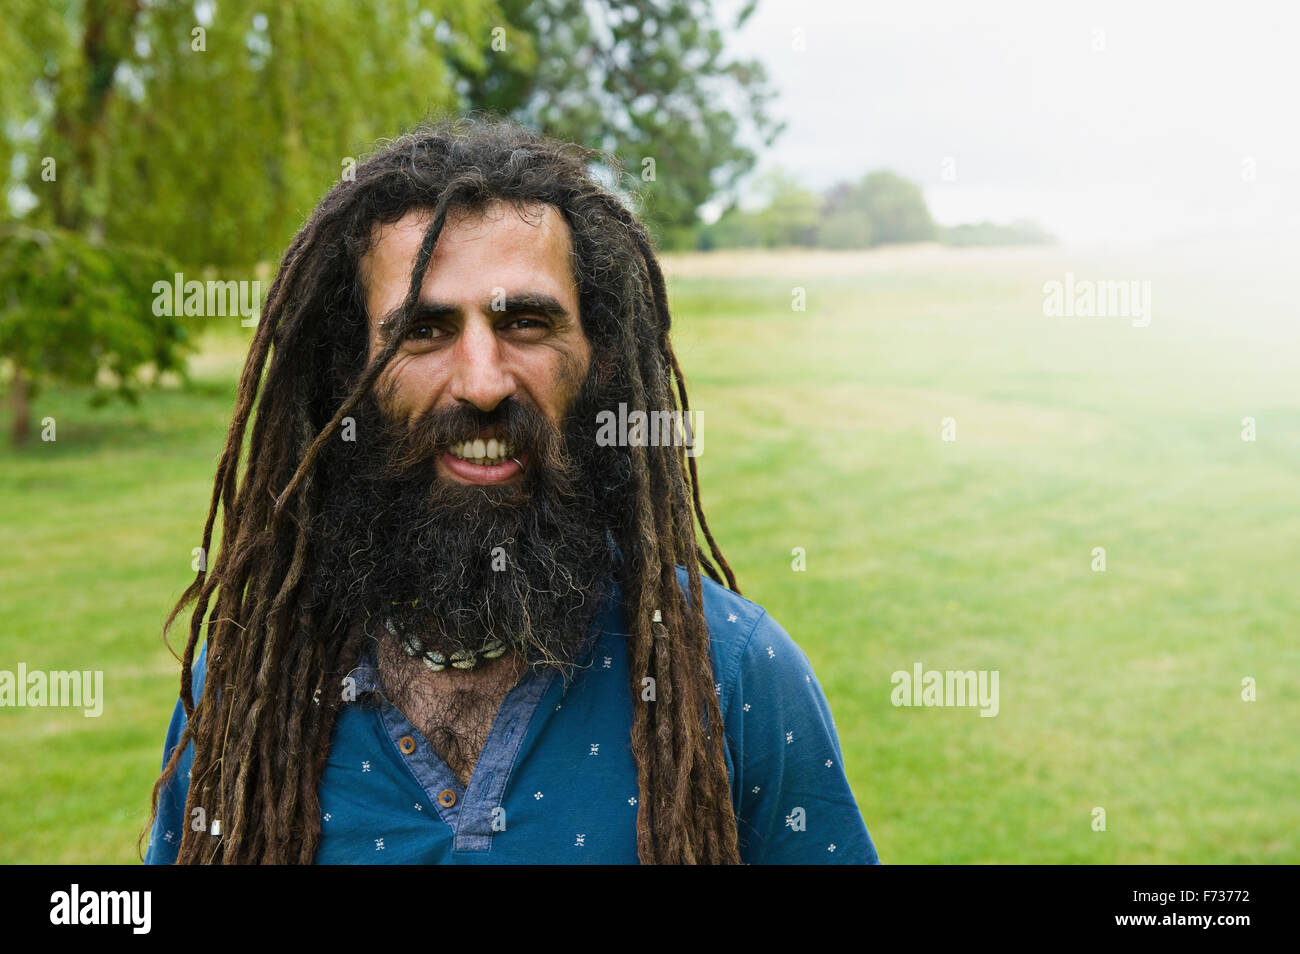 A man with long dreadlocks in a blue shirt. Stock Photo